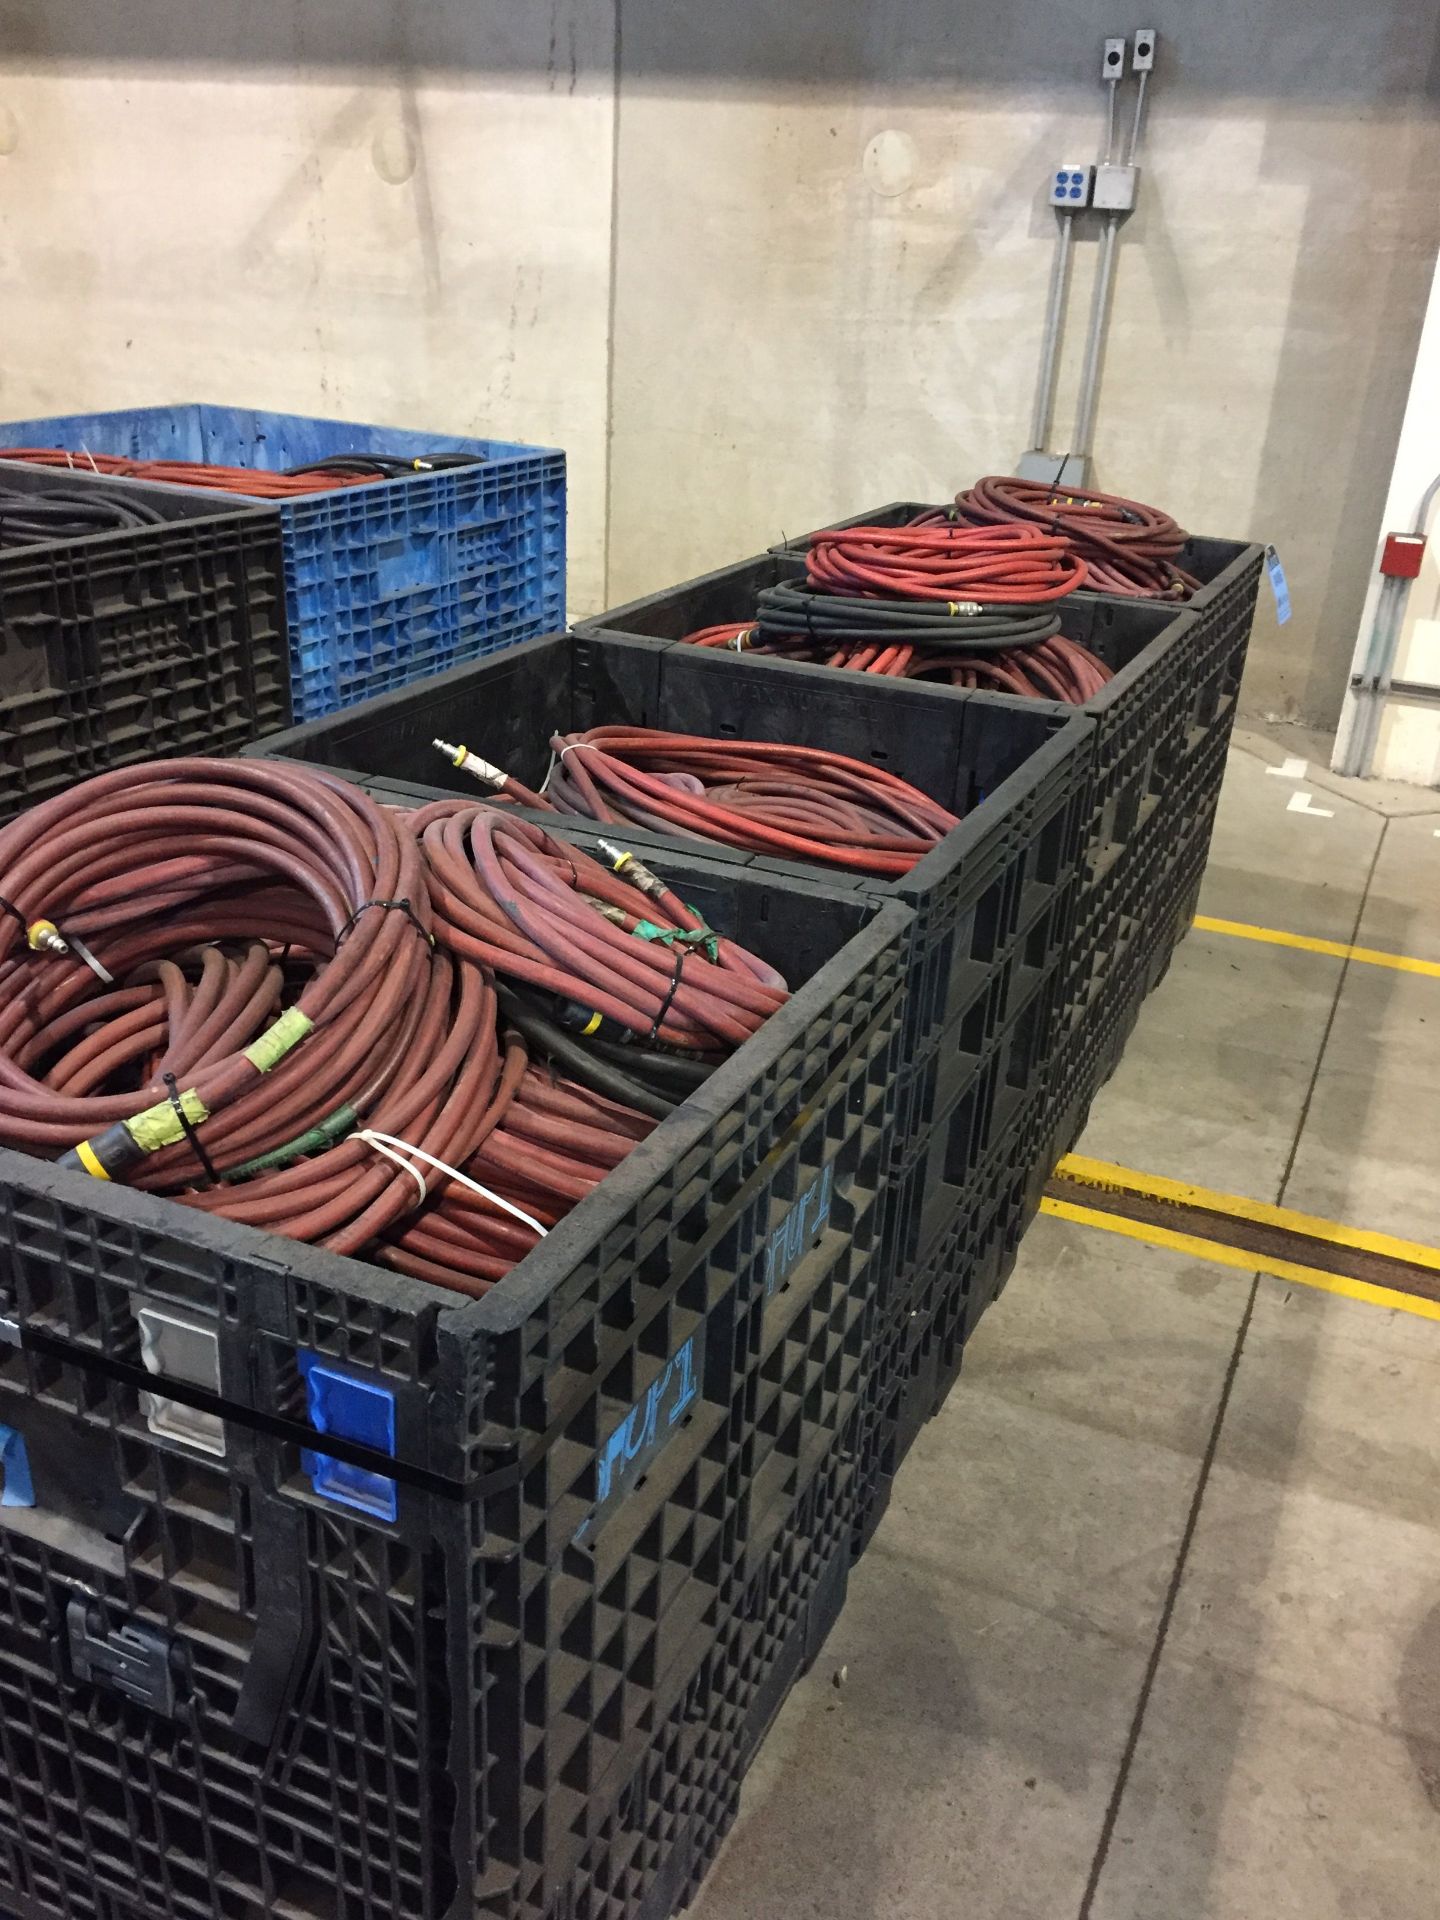 (LOT) MISCELLANEOUS AIR HOSE WITH (4) COLLAPSIBLE TOTES - Image 4 of 4